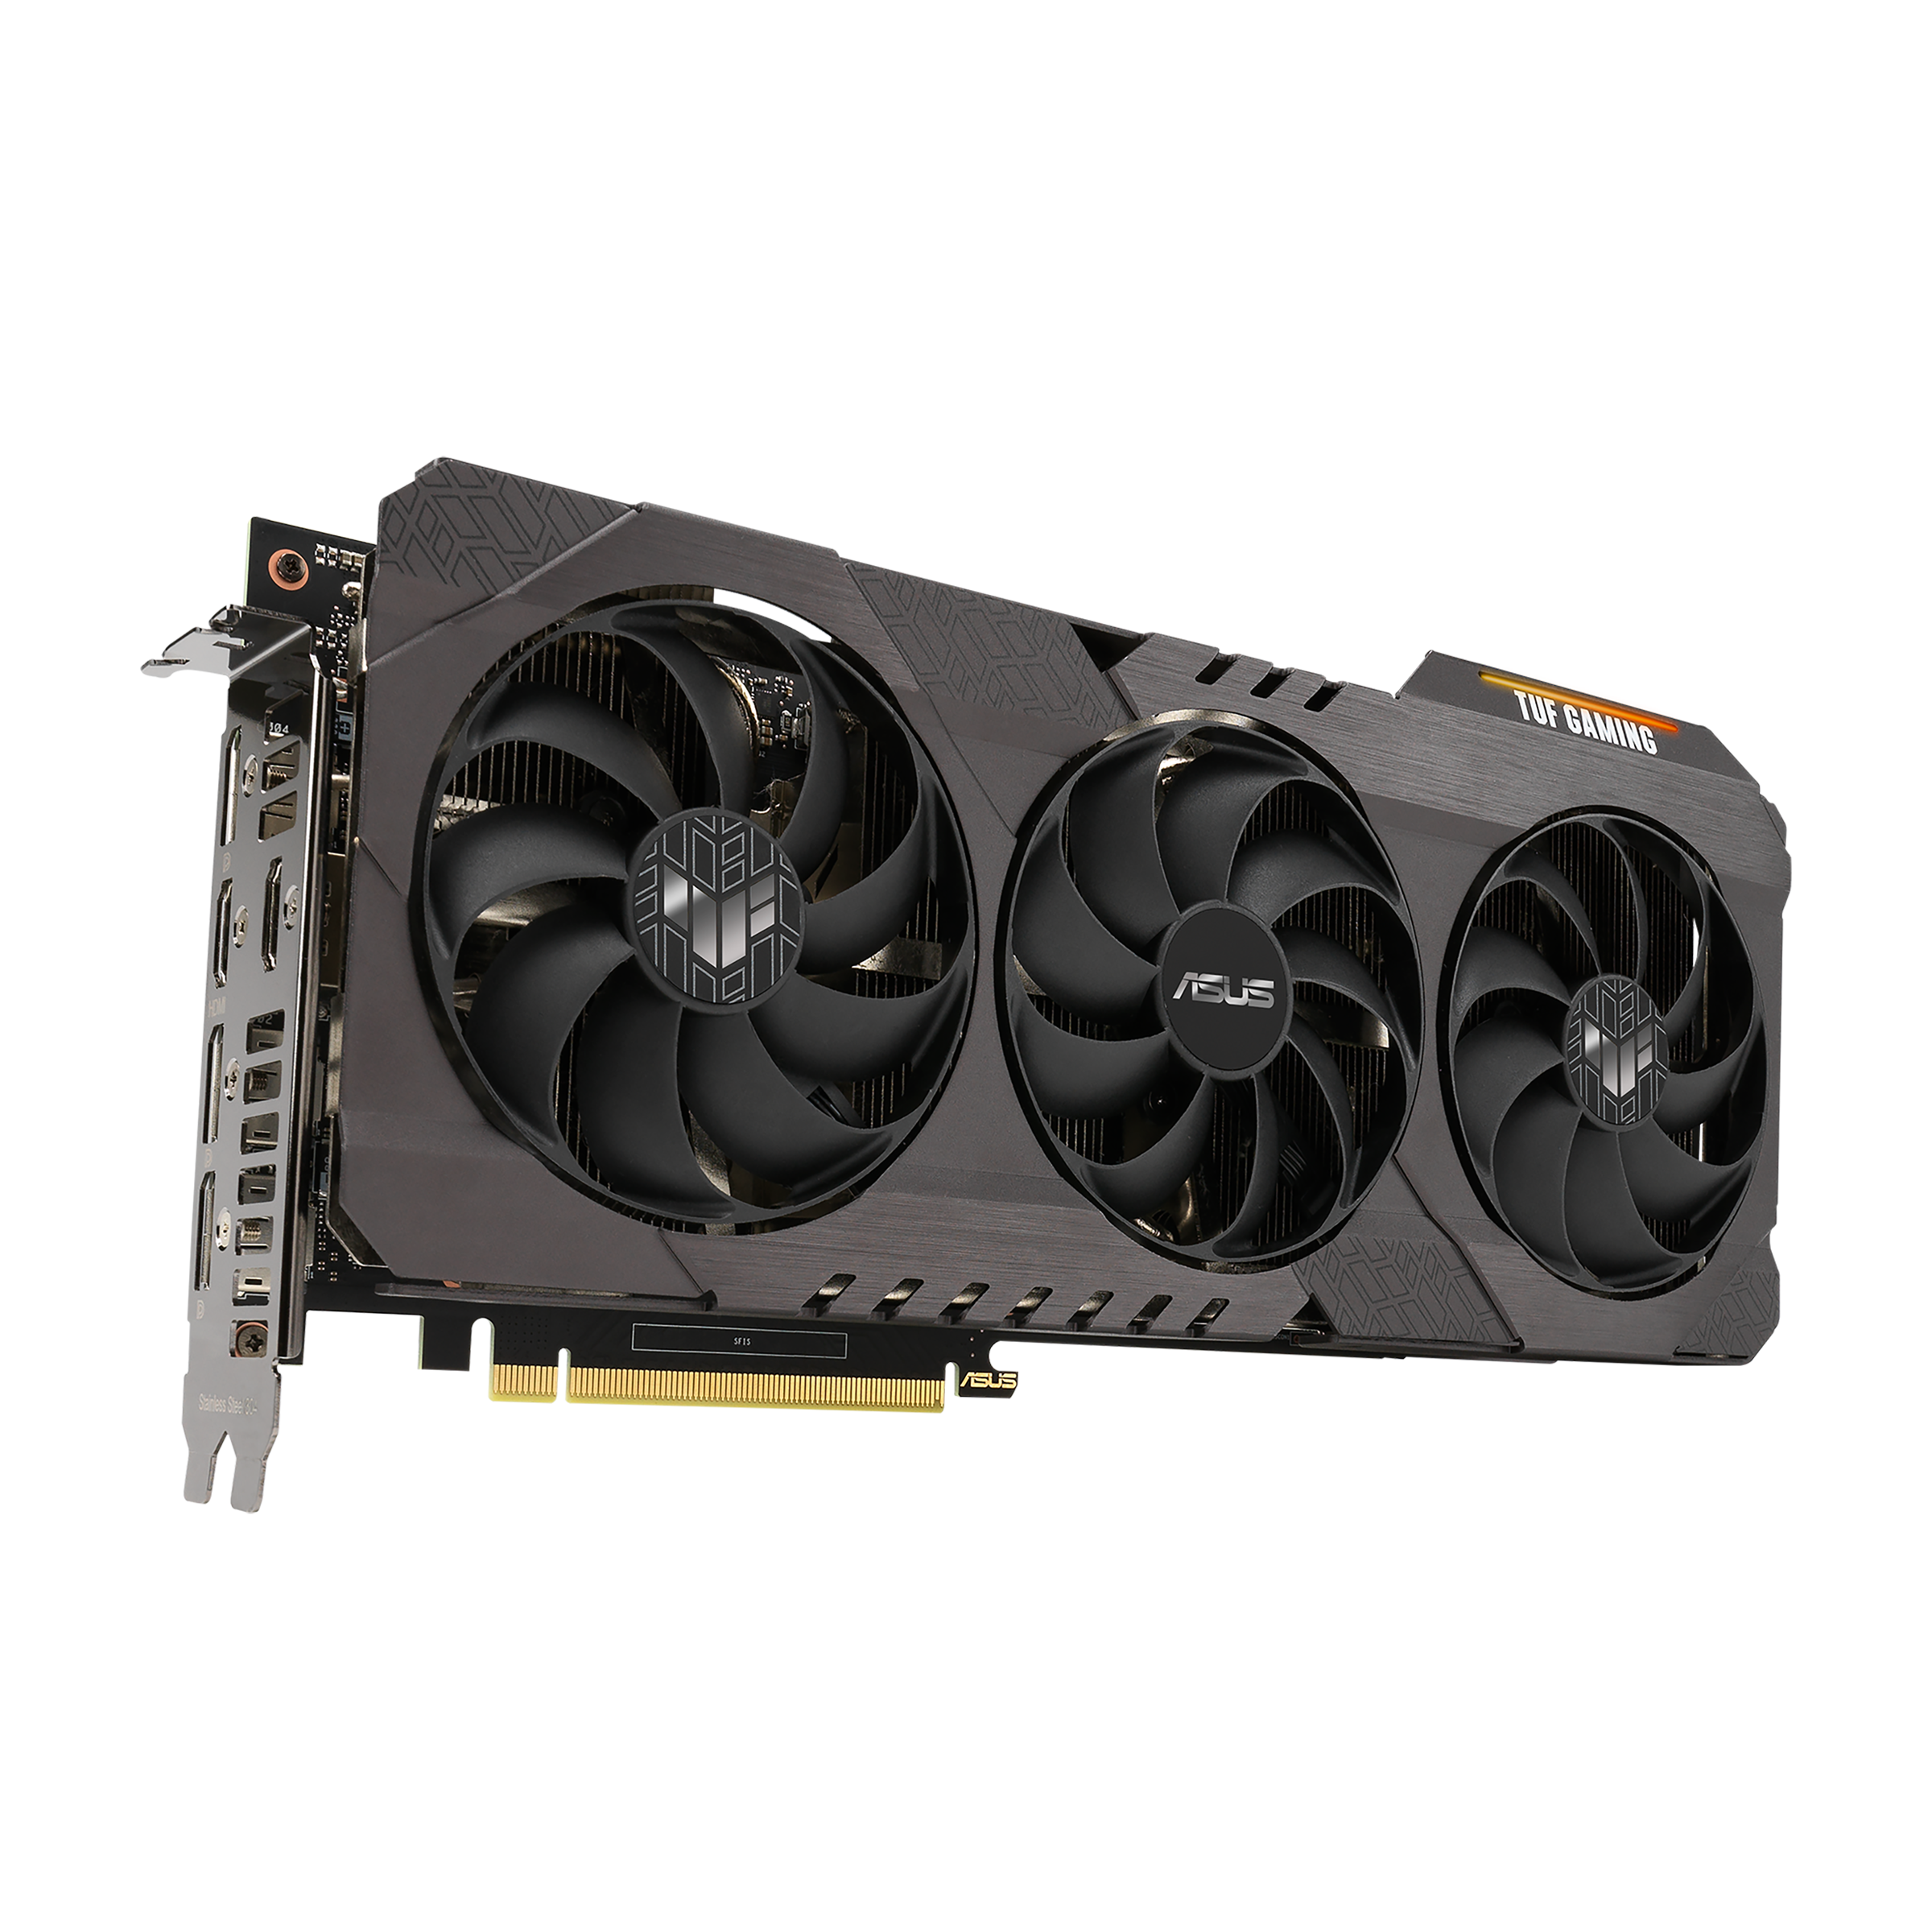 TUF-RTX3070-8G-GAMING｜Graphics Cards｜ASUS Global